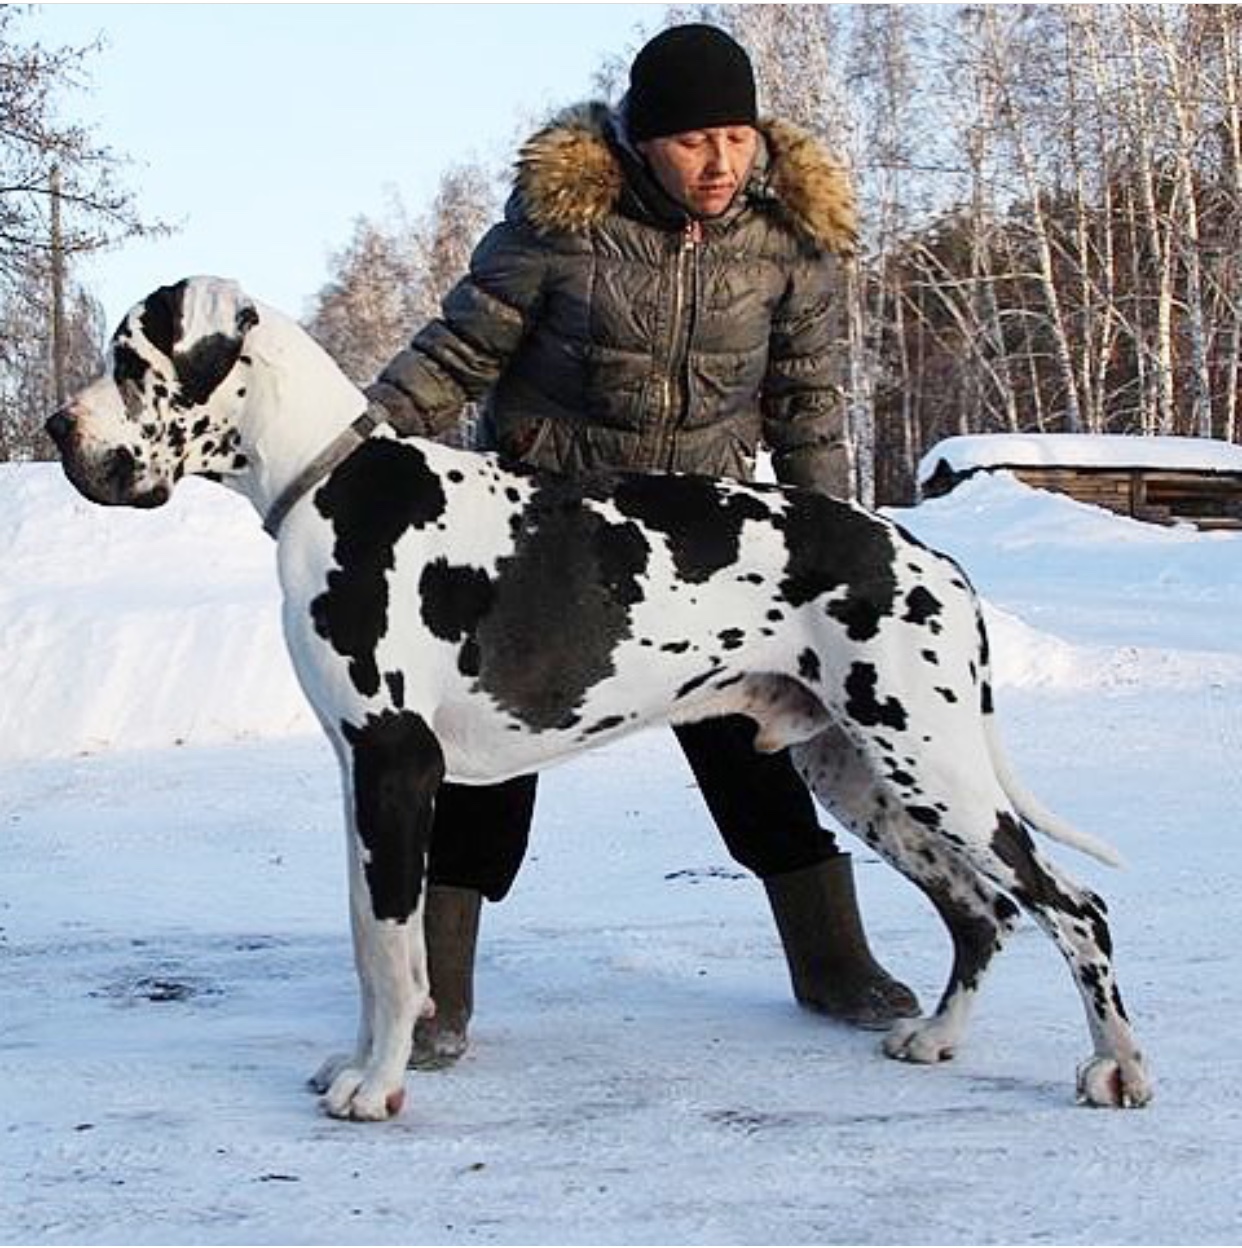 A Great Dane standing in snow while a man is beside him